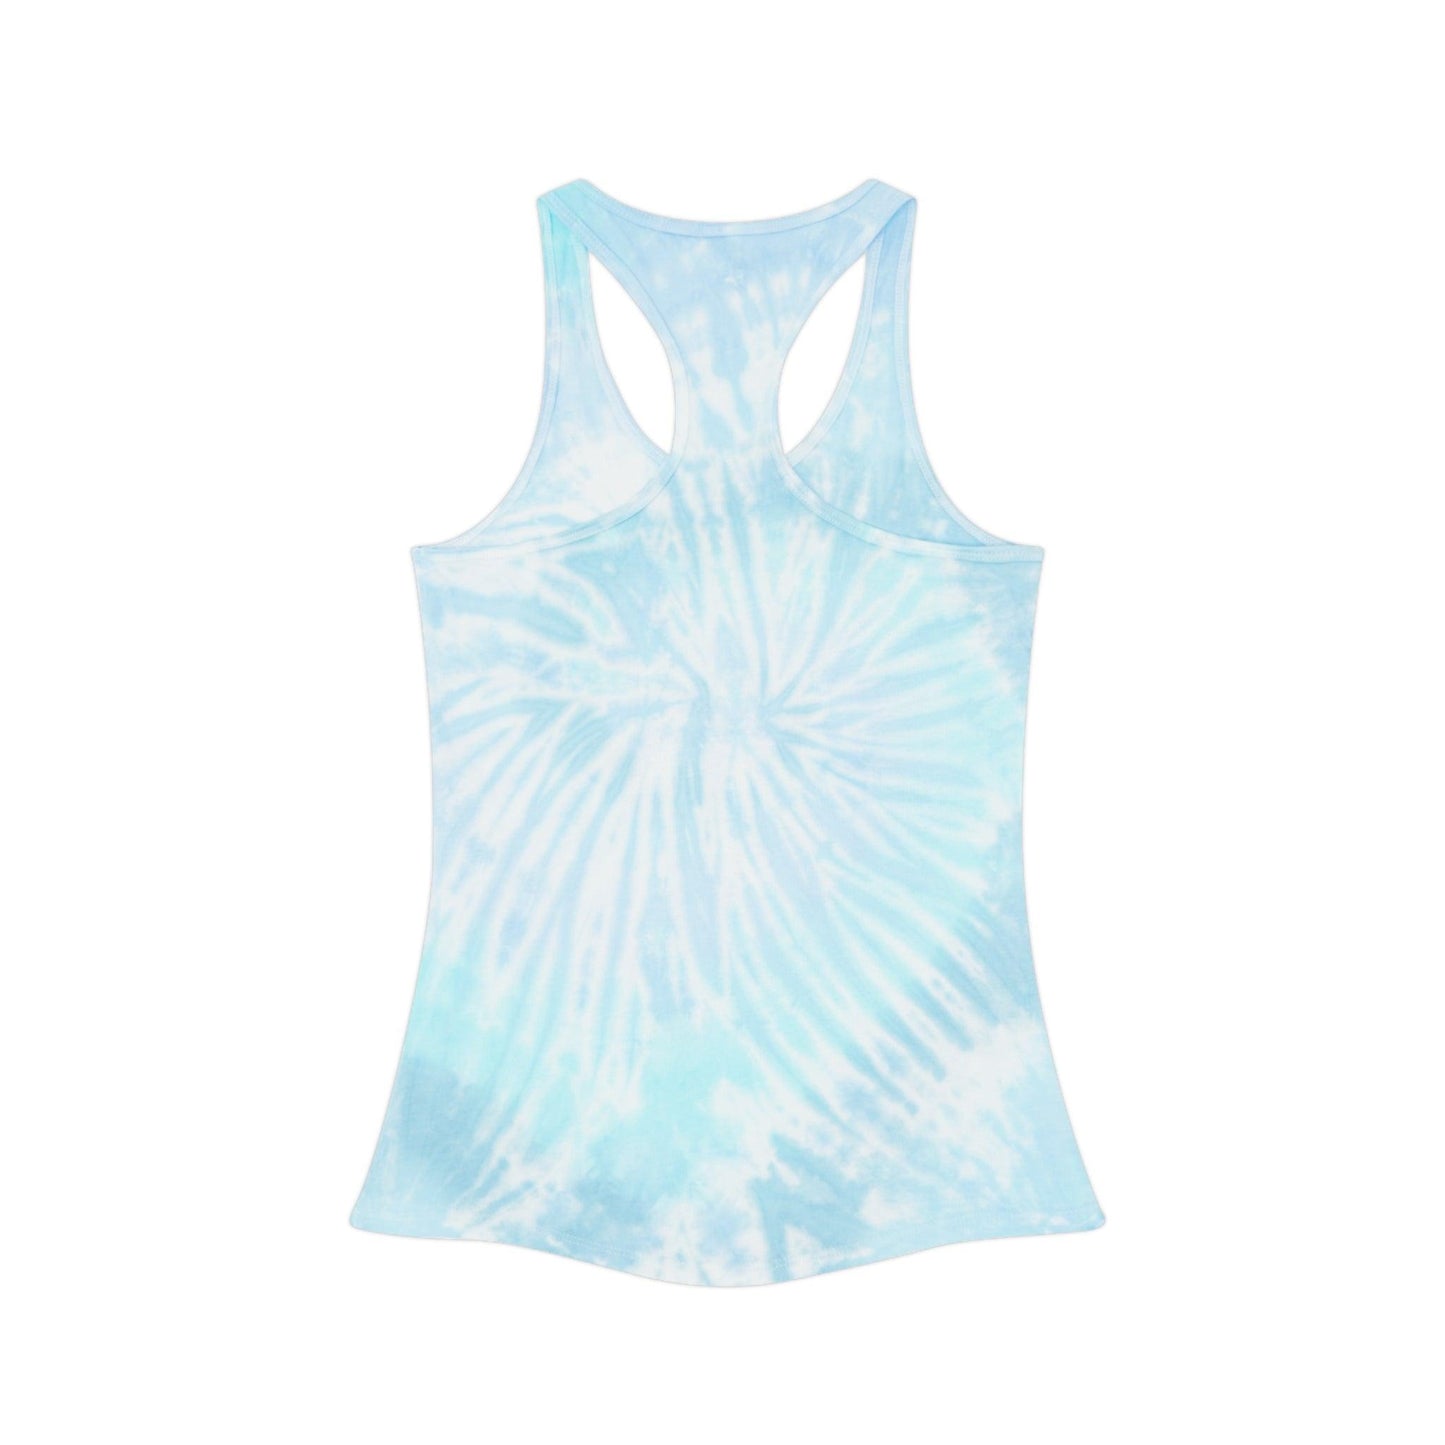 Salt and Tequila Feed the Soul Tie Dye Racerback Tank Top - Coastal Collections